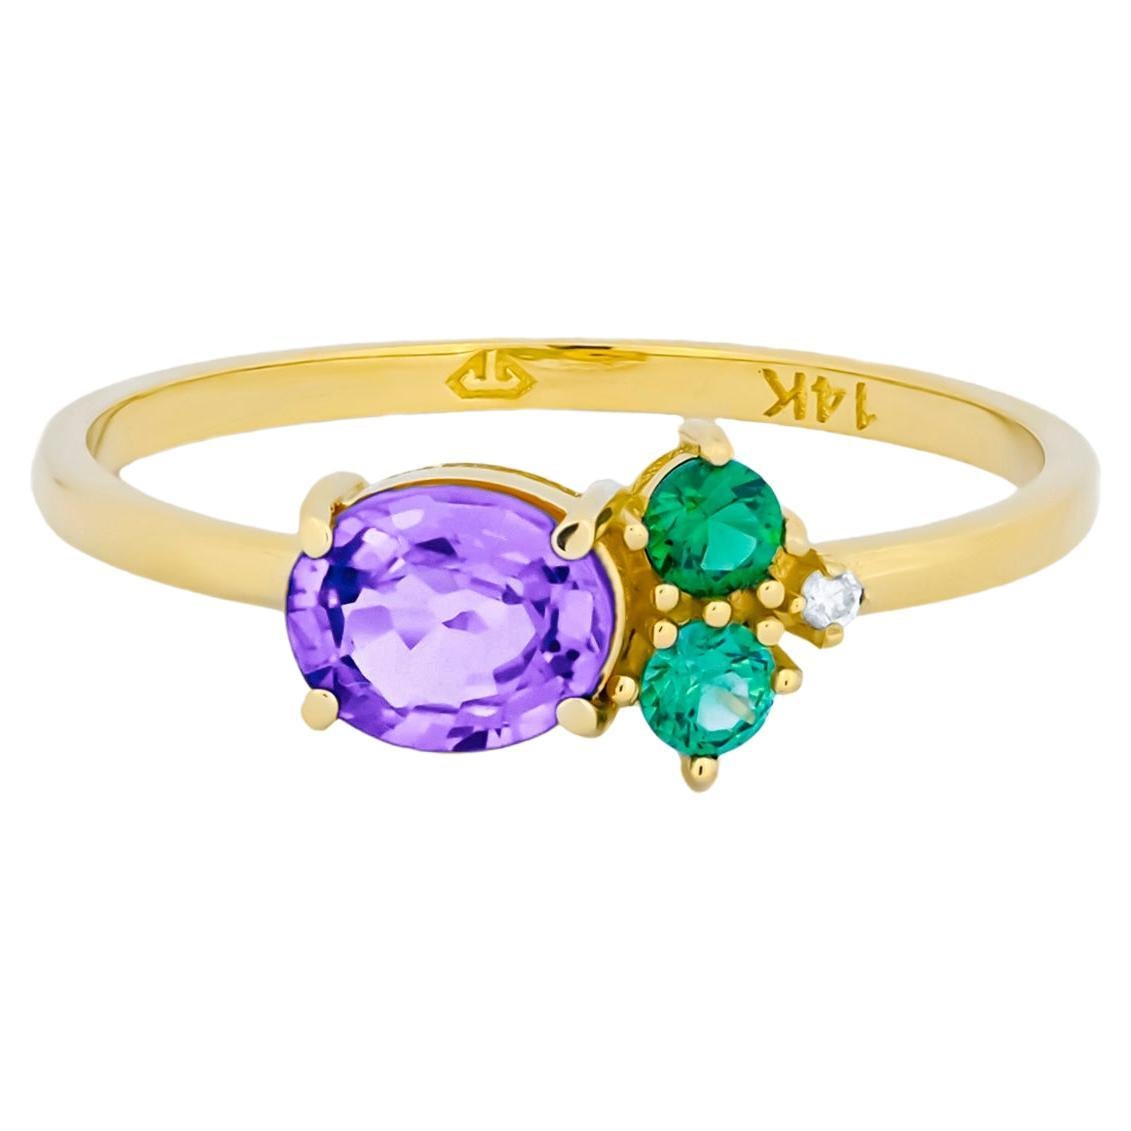 Oval amethyst, tsavorite and diamonds 14k gold ring. For Sale